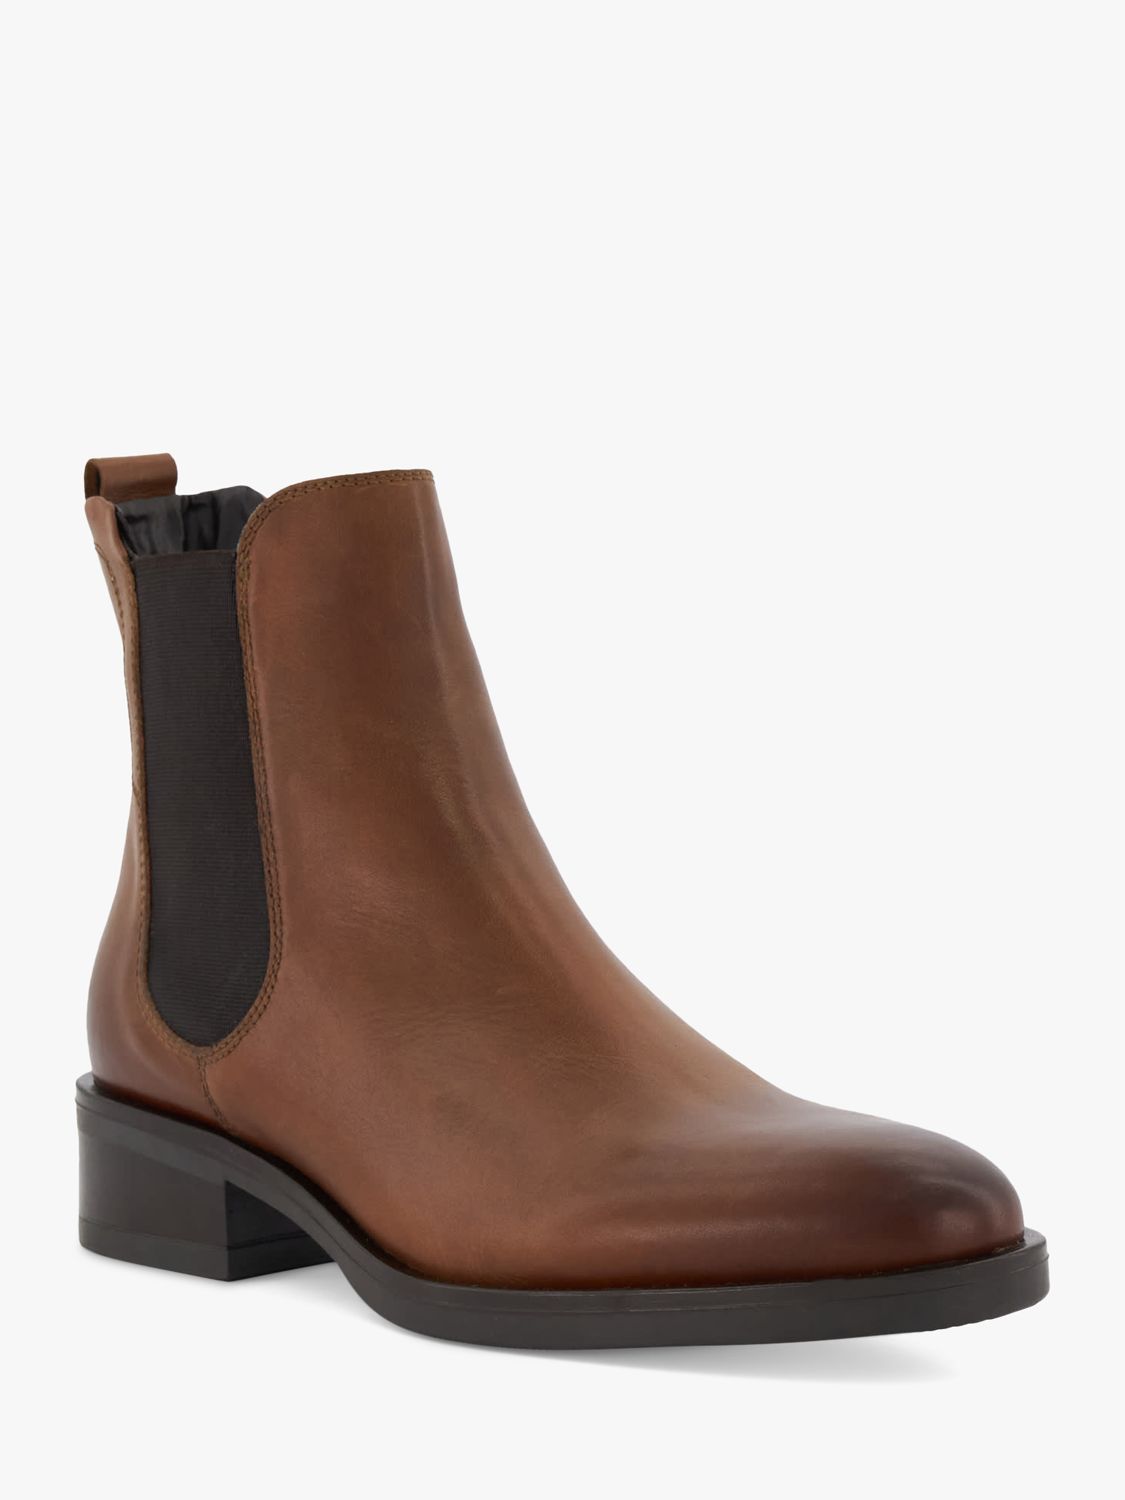 Buy Dune Panoramic Leather Chelsea Boots Online at johnlewis.com